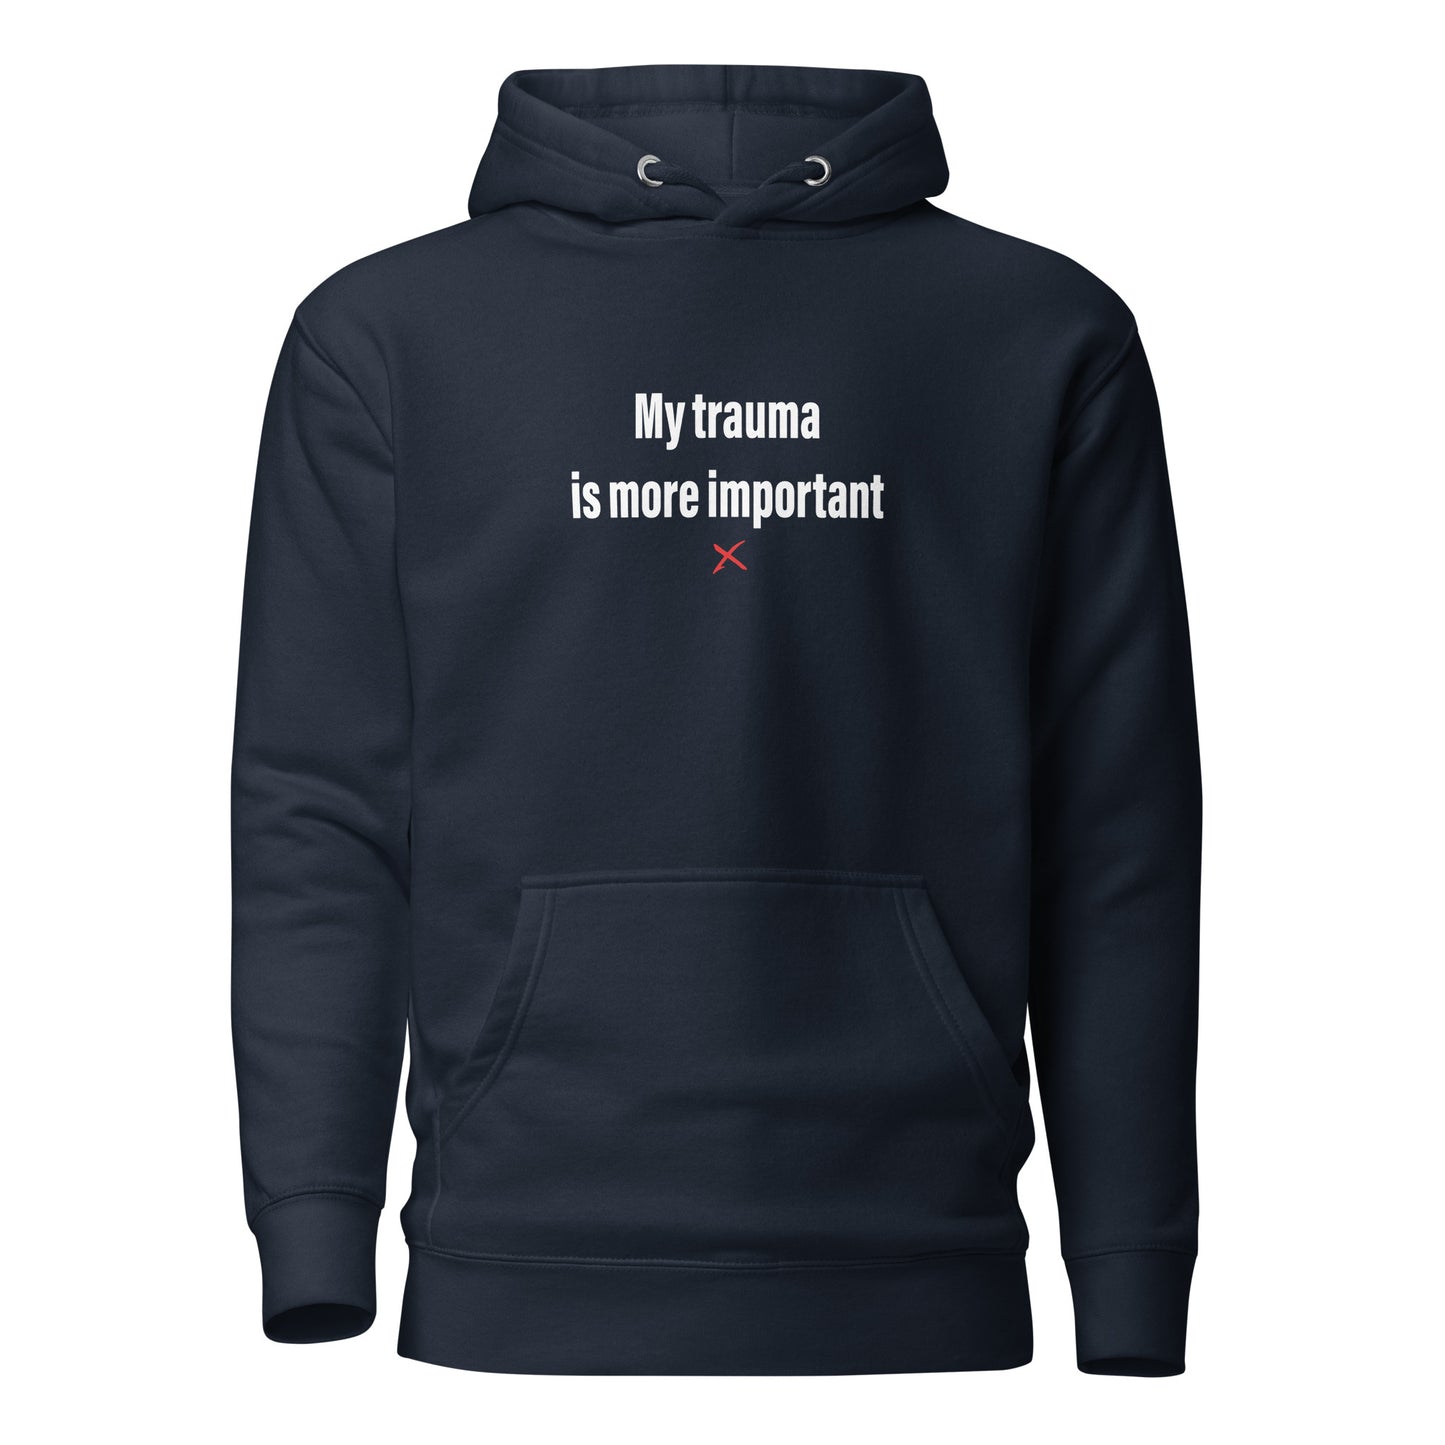 My trauma is more important - Hoodie